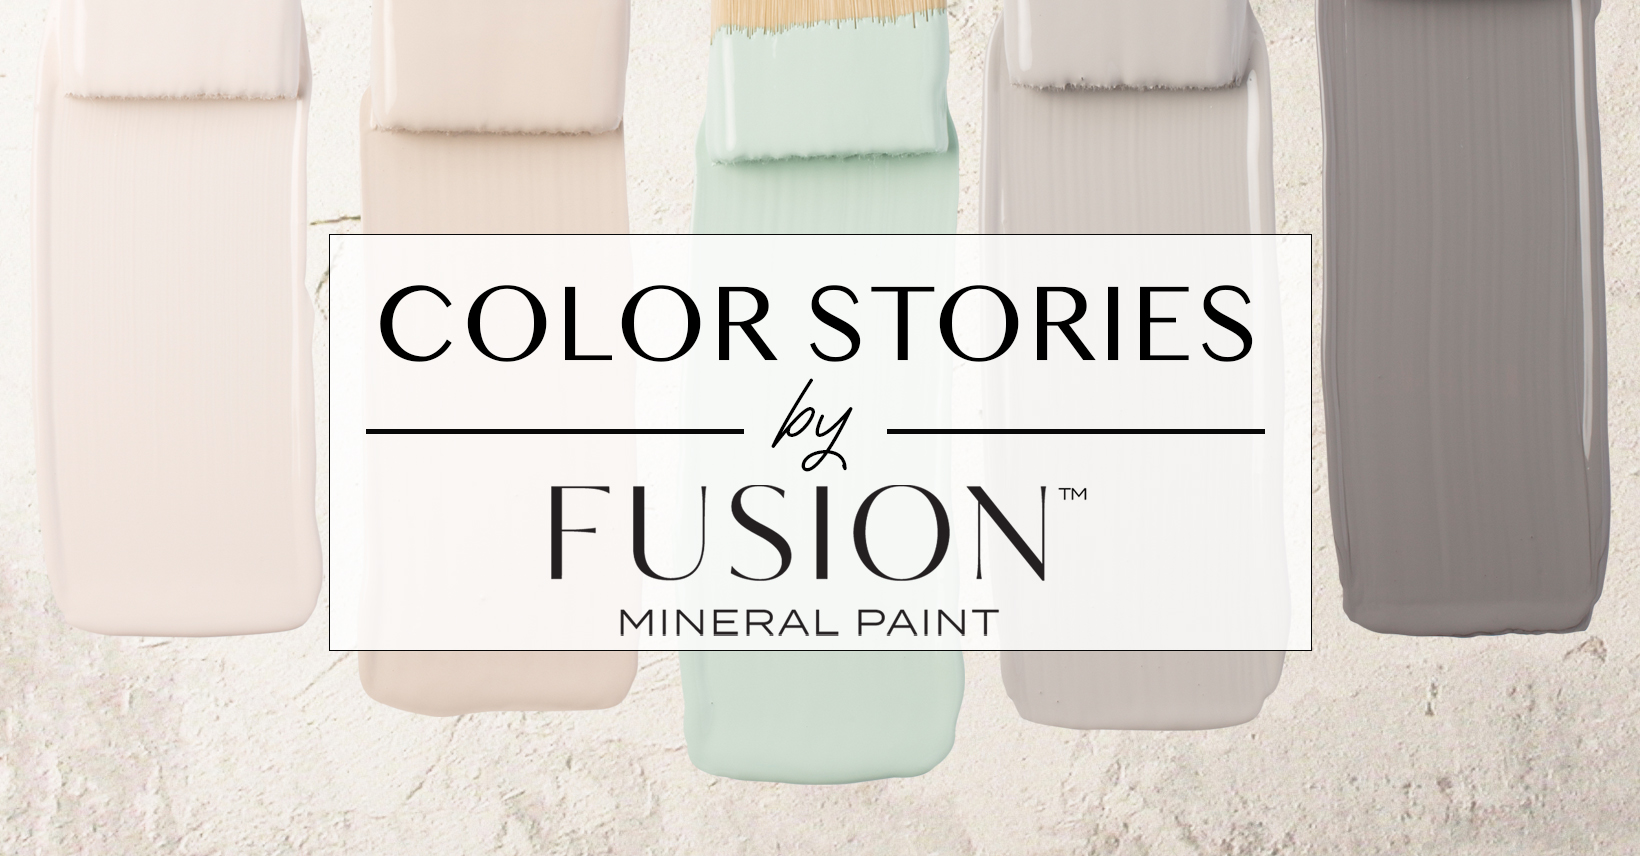 November's Color Story from Fusion Mineral Paint featuring Raw Silk, Cathedral Taupe, Laurentien, Little Lamb, and Soap Stone.